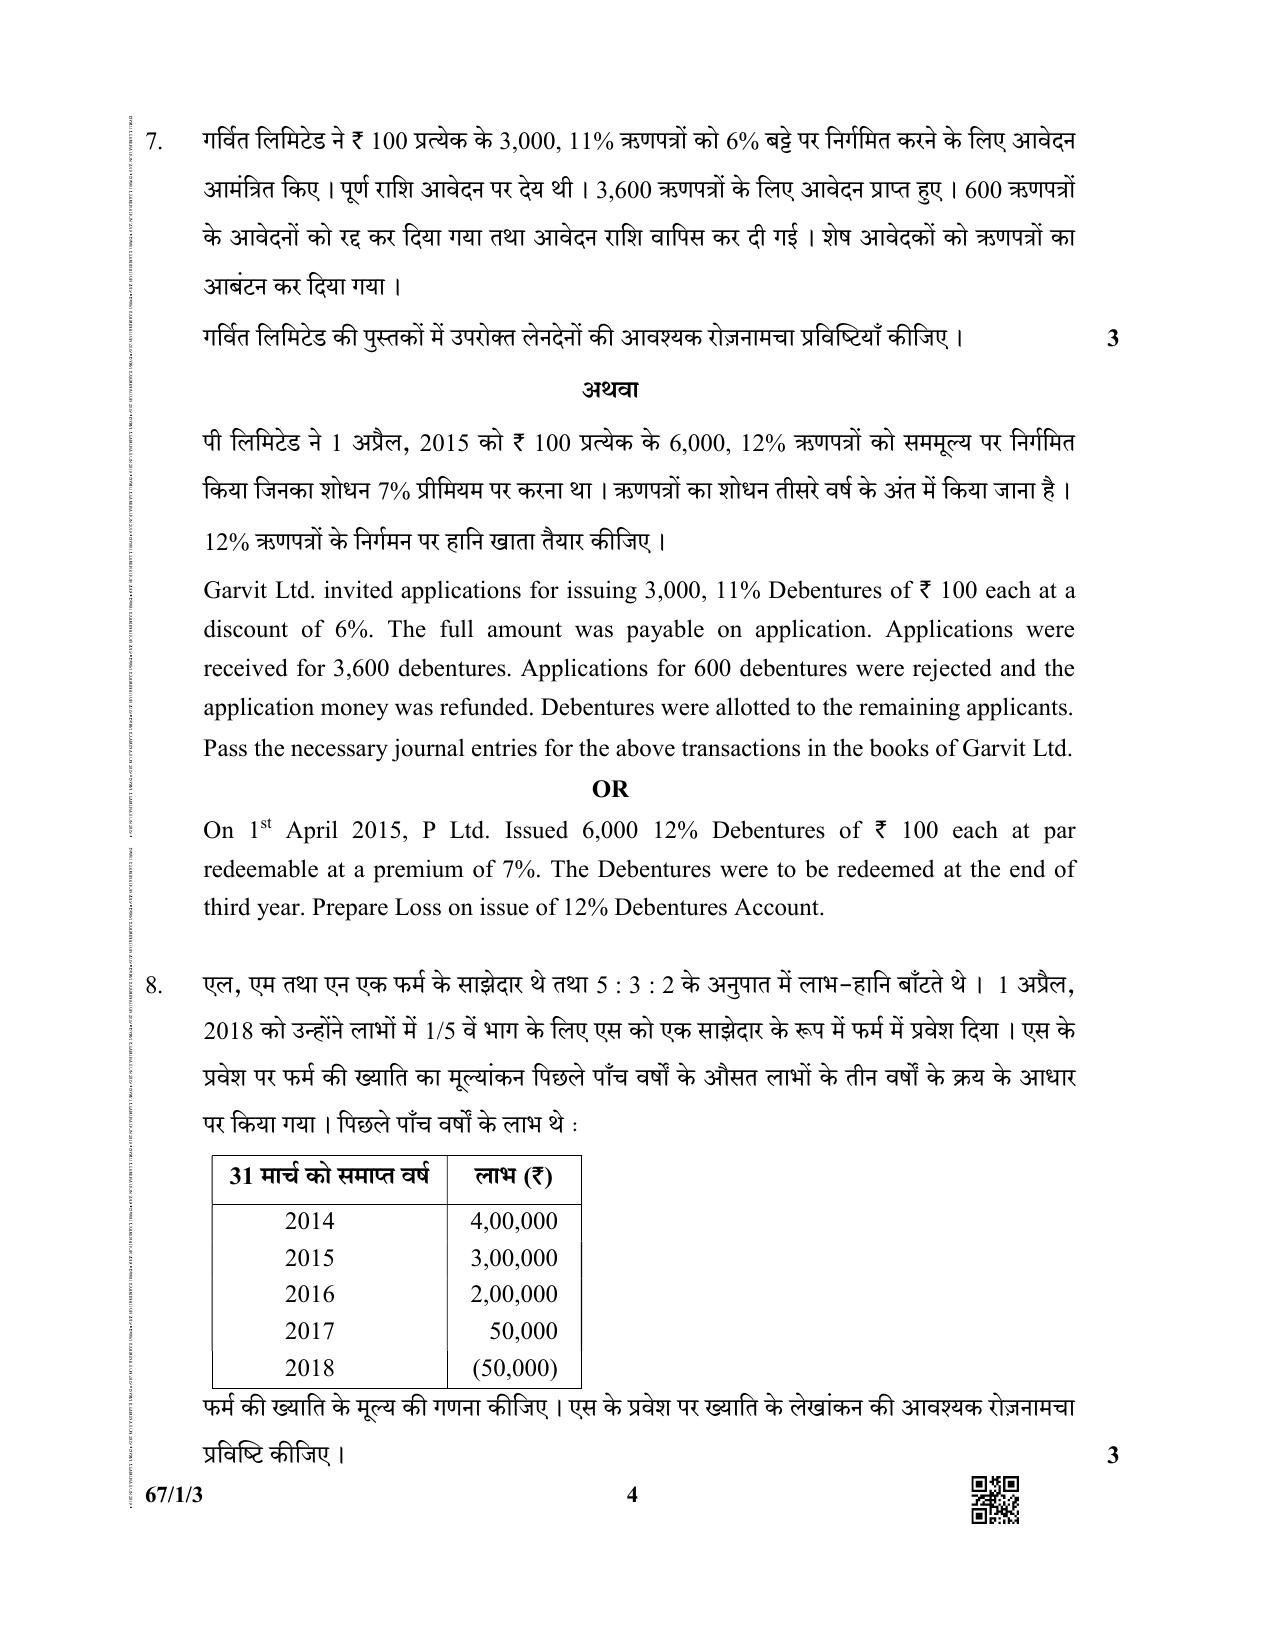 CBSE Class 12 67-1-3  (Accountancy) 2019 Question Paper - Page 4